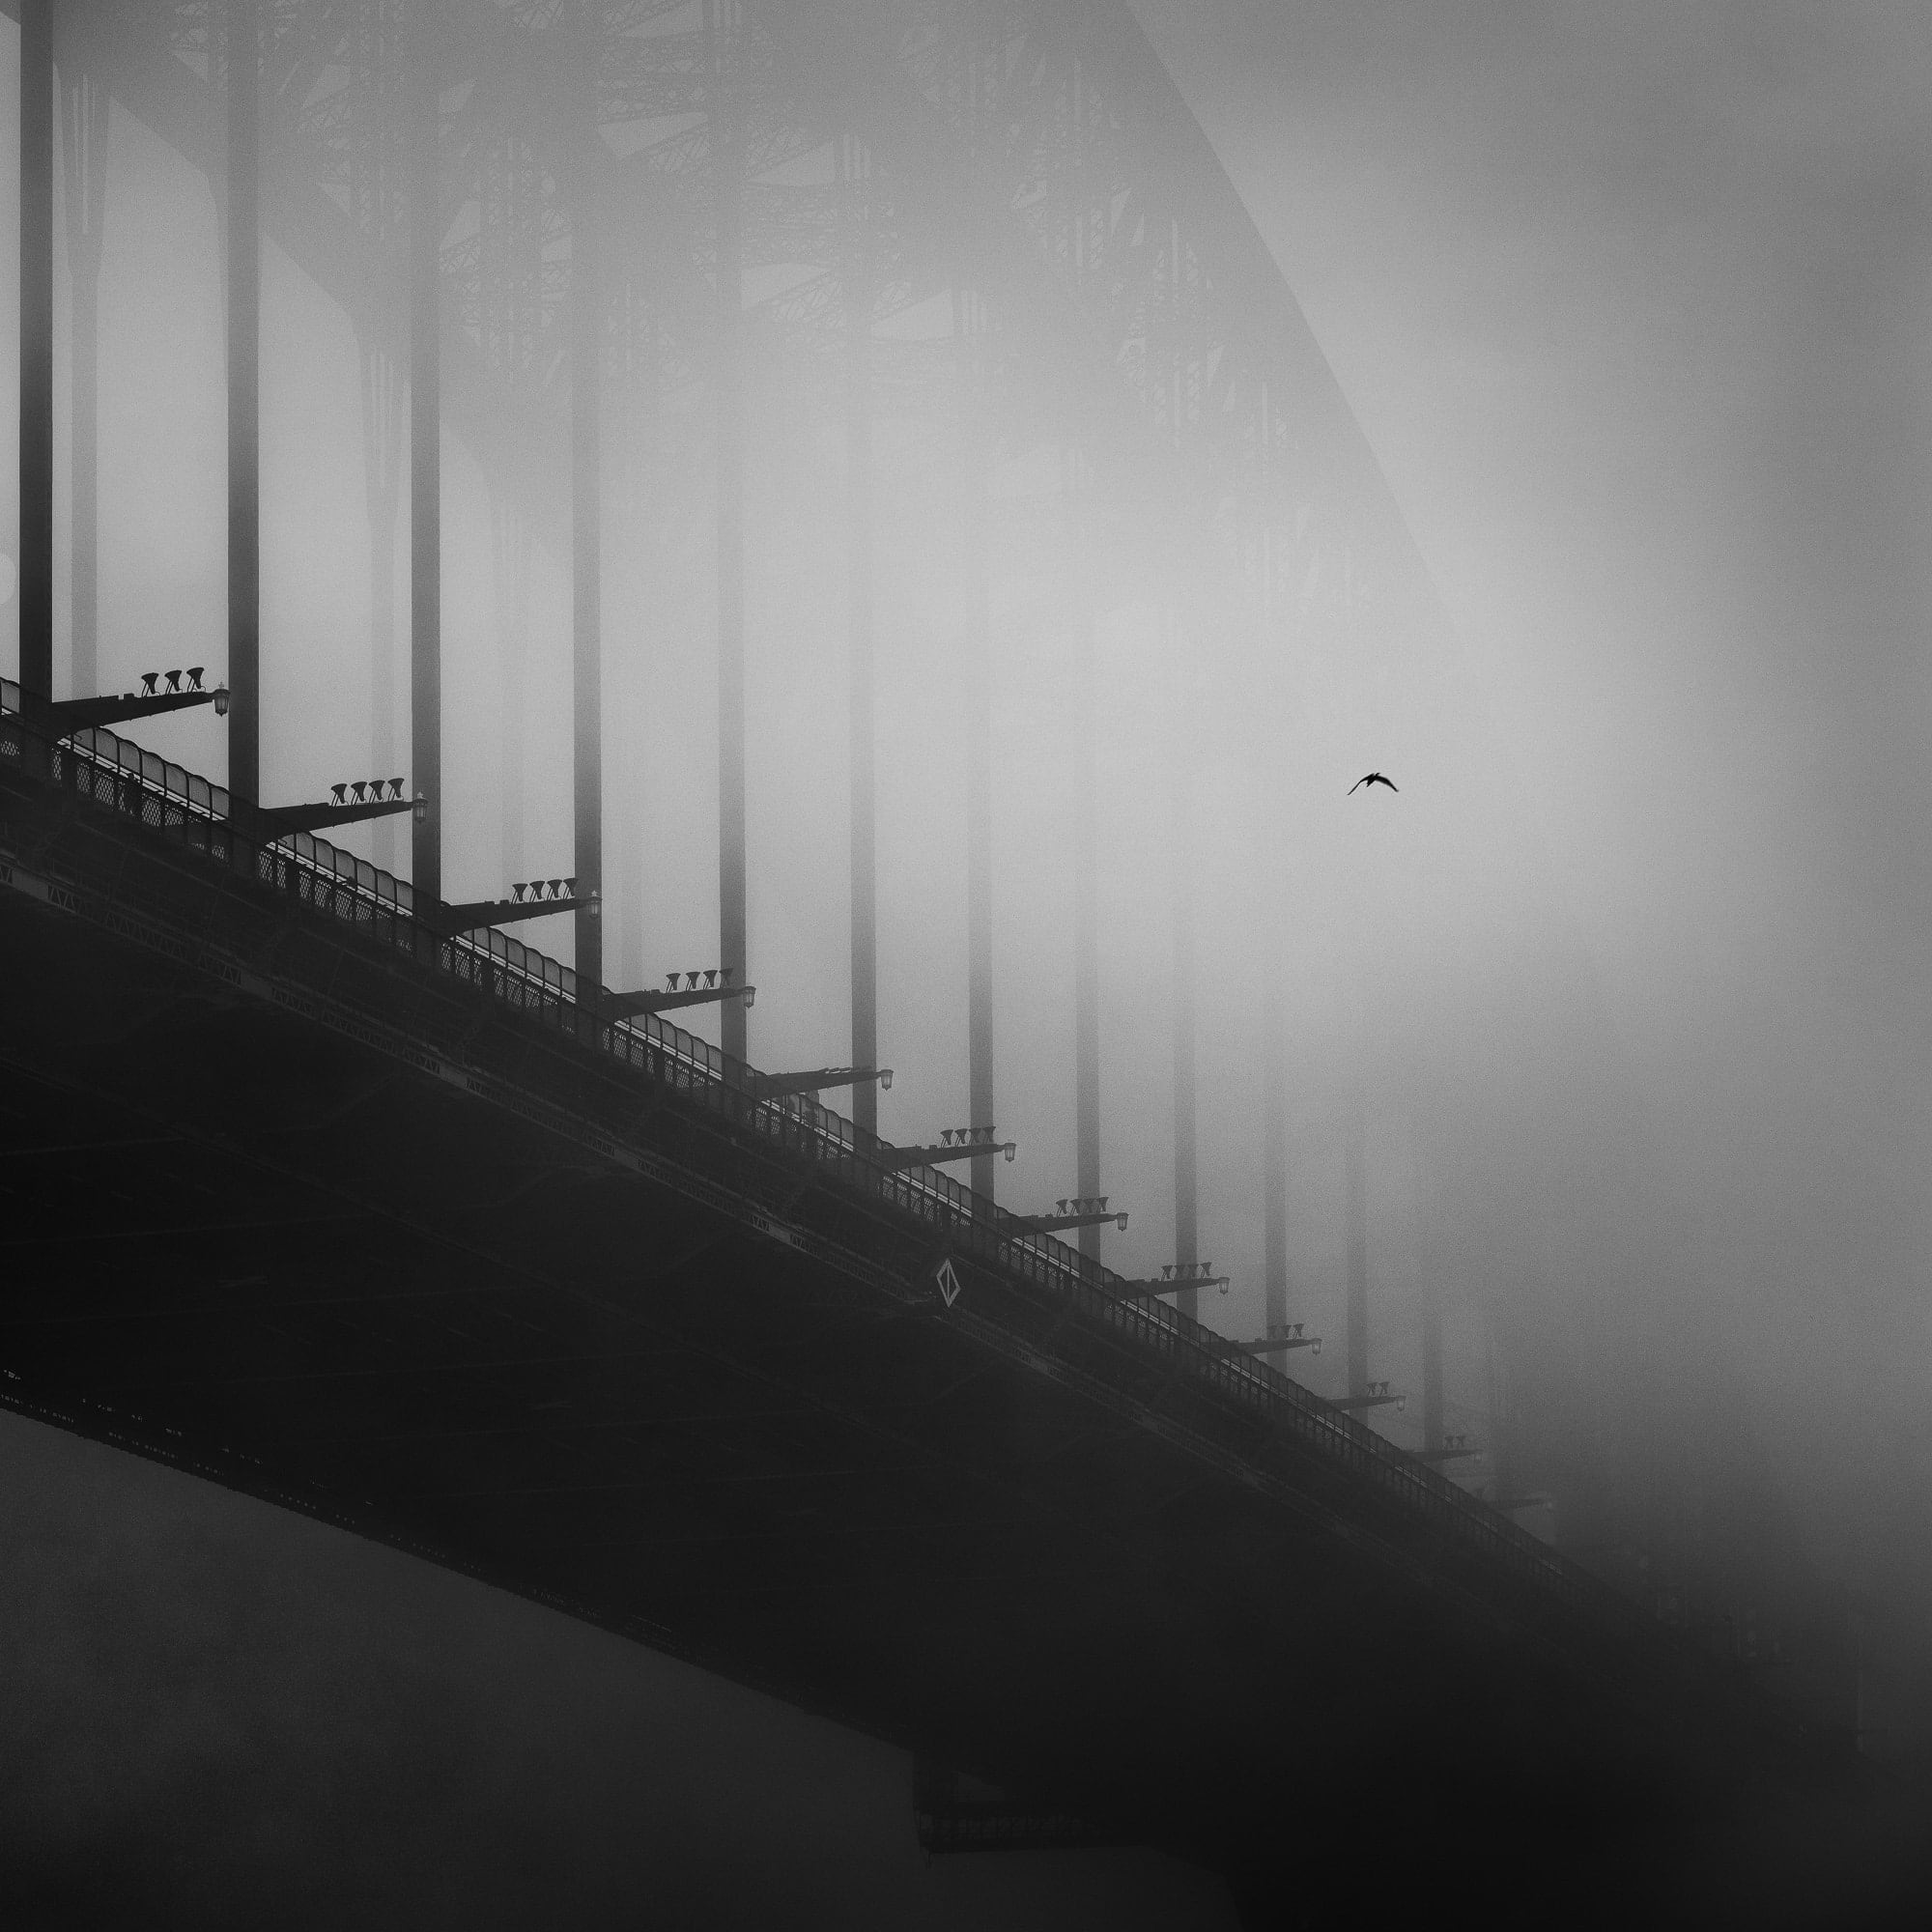 Black and white image of the Sydney Harbour Bridge enveloped in fog with a single bird flying, symbolizing solitude and mystery.